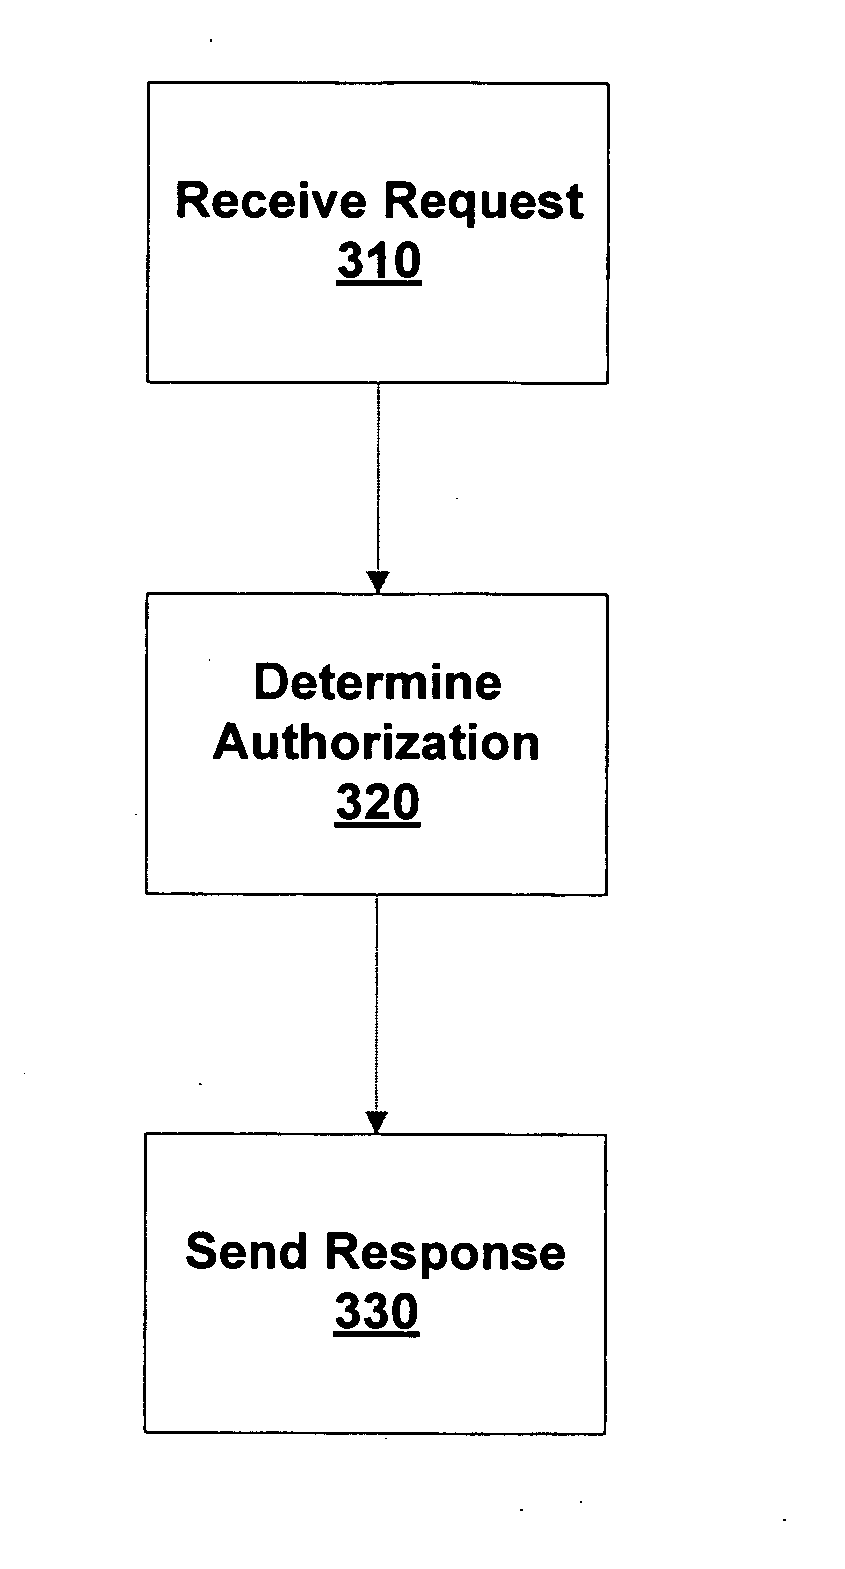 Network access control including dynamic policy enforcement point